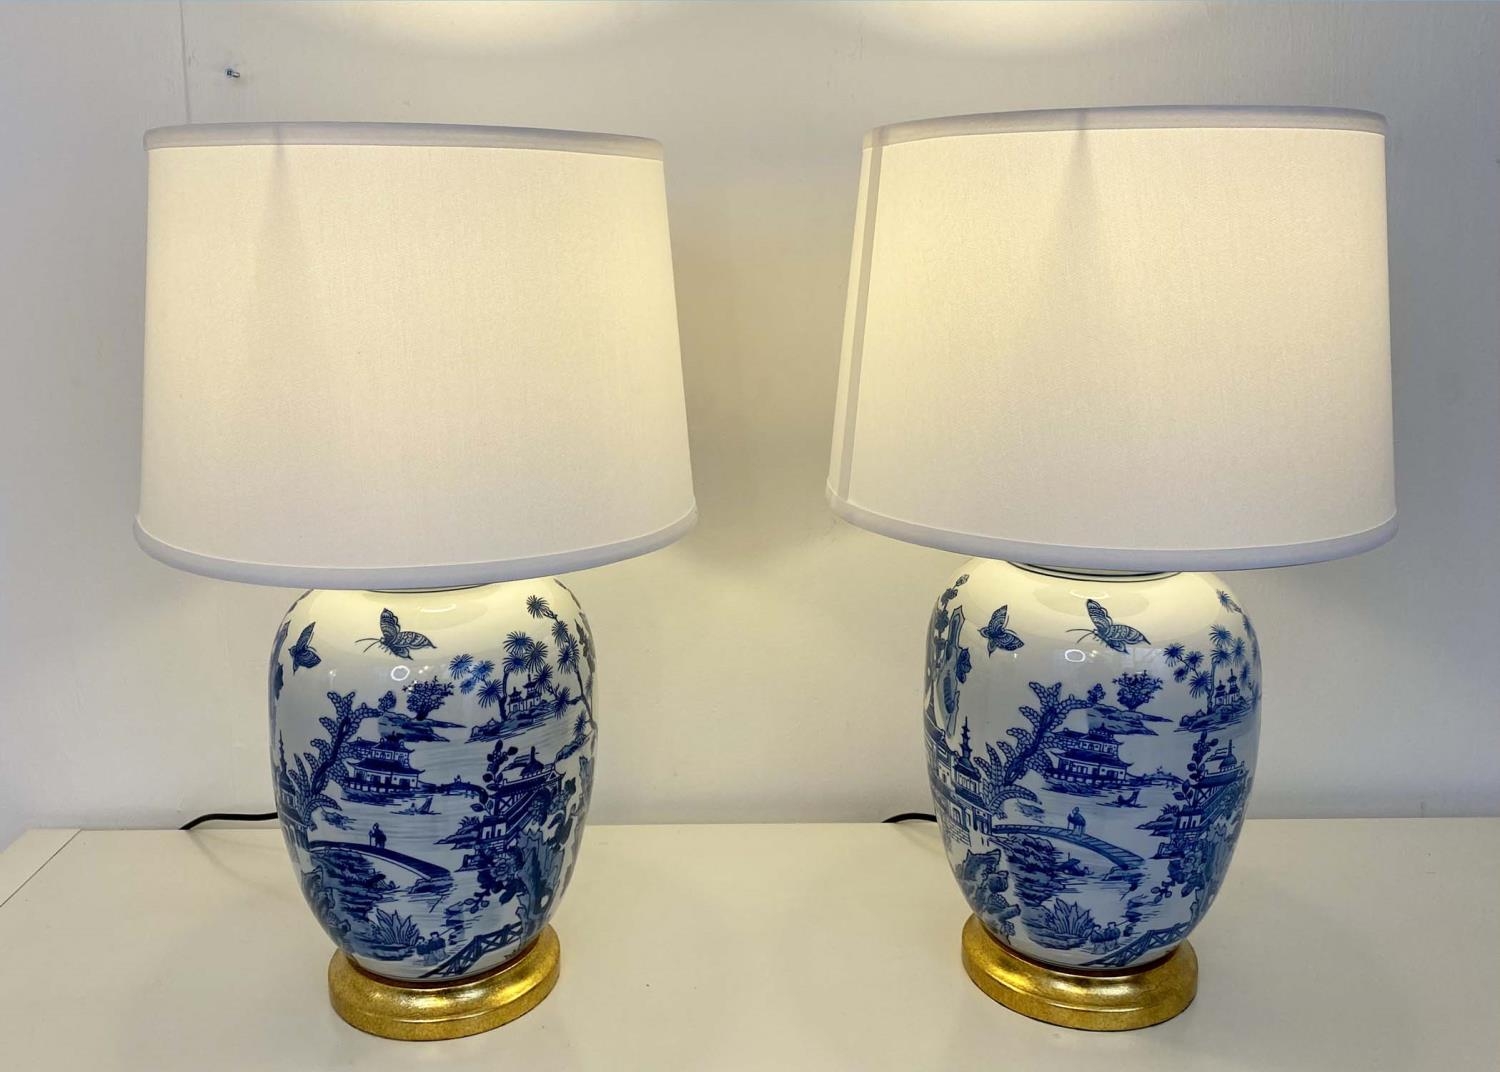 TABLE LAMPS, pair, 62cm H x 38cm diam., Chinese export style blue and white ceramic, neutral shades,